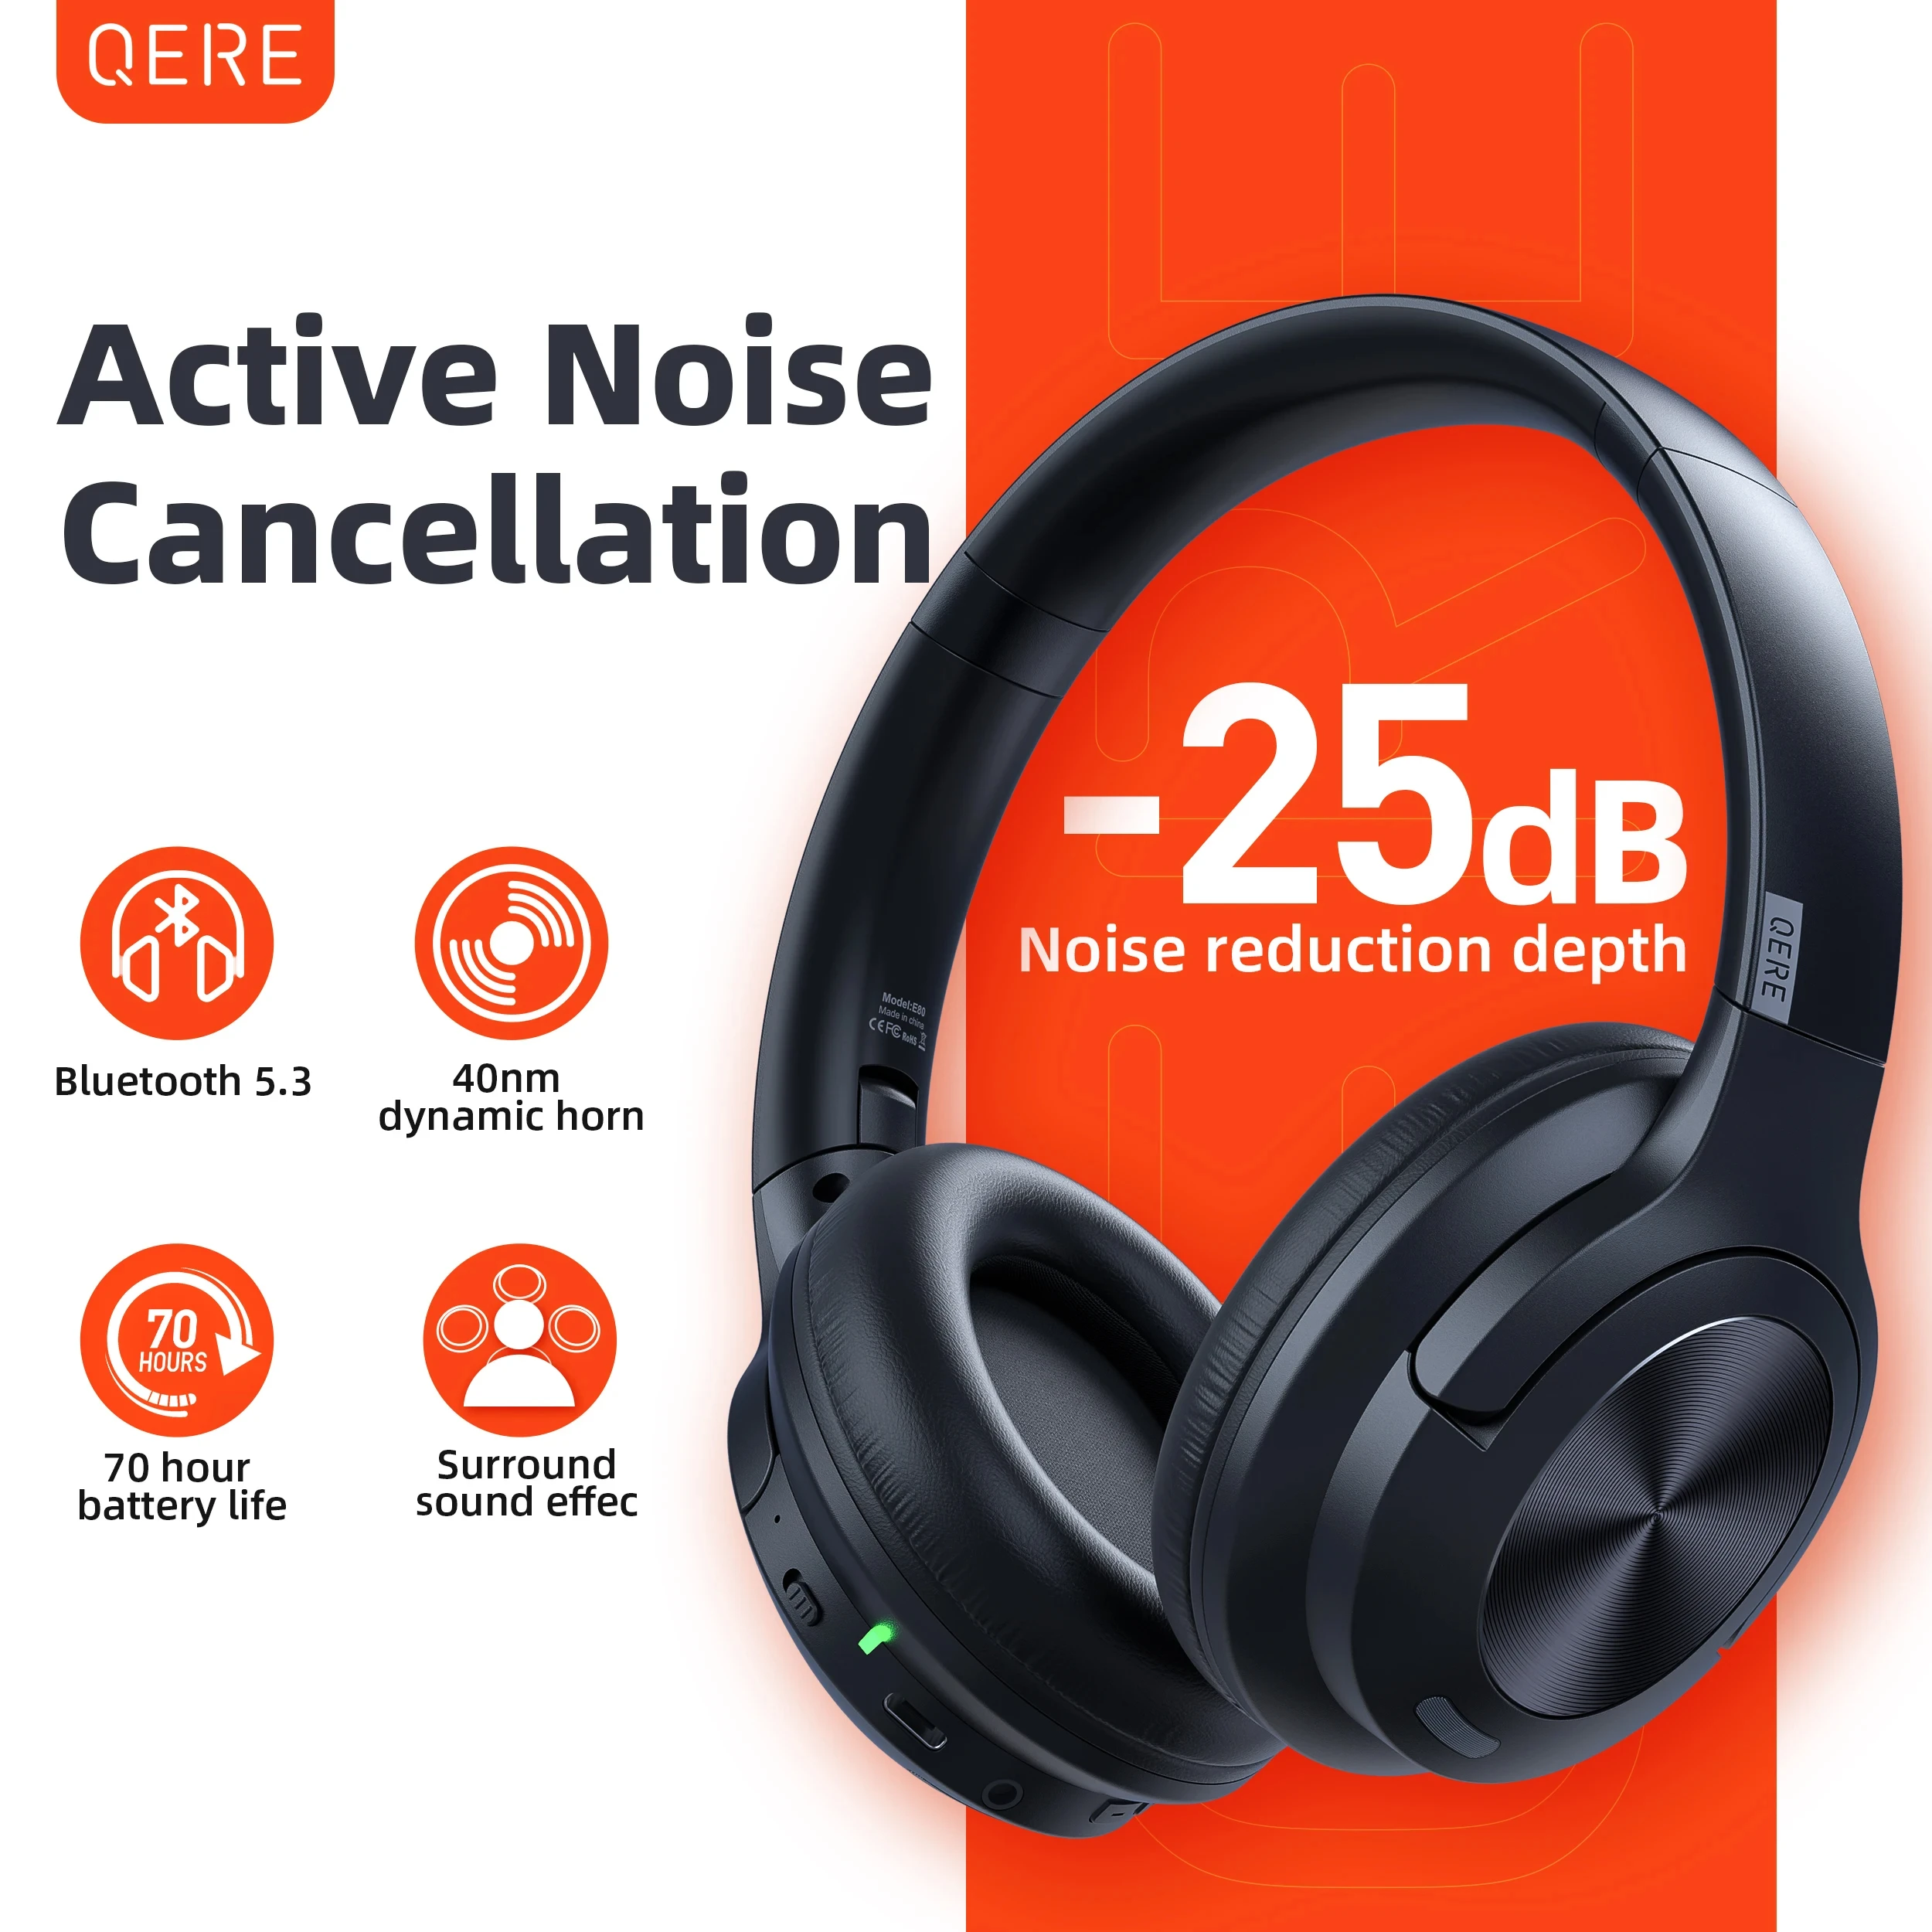 

Wireless headphones QERE E80 Earphone bluetooth 5.3 ANC Noise Cancellation Hi-Res Audio Over the Ear Headset 70H 40mm Driver2.4G